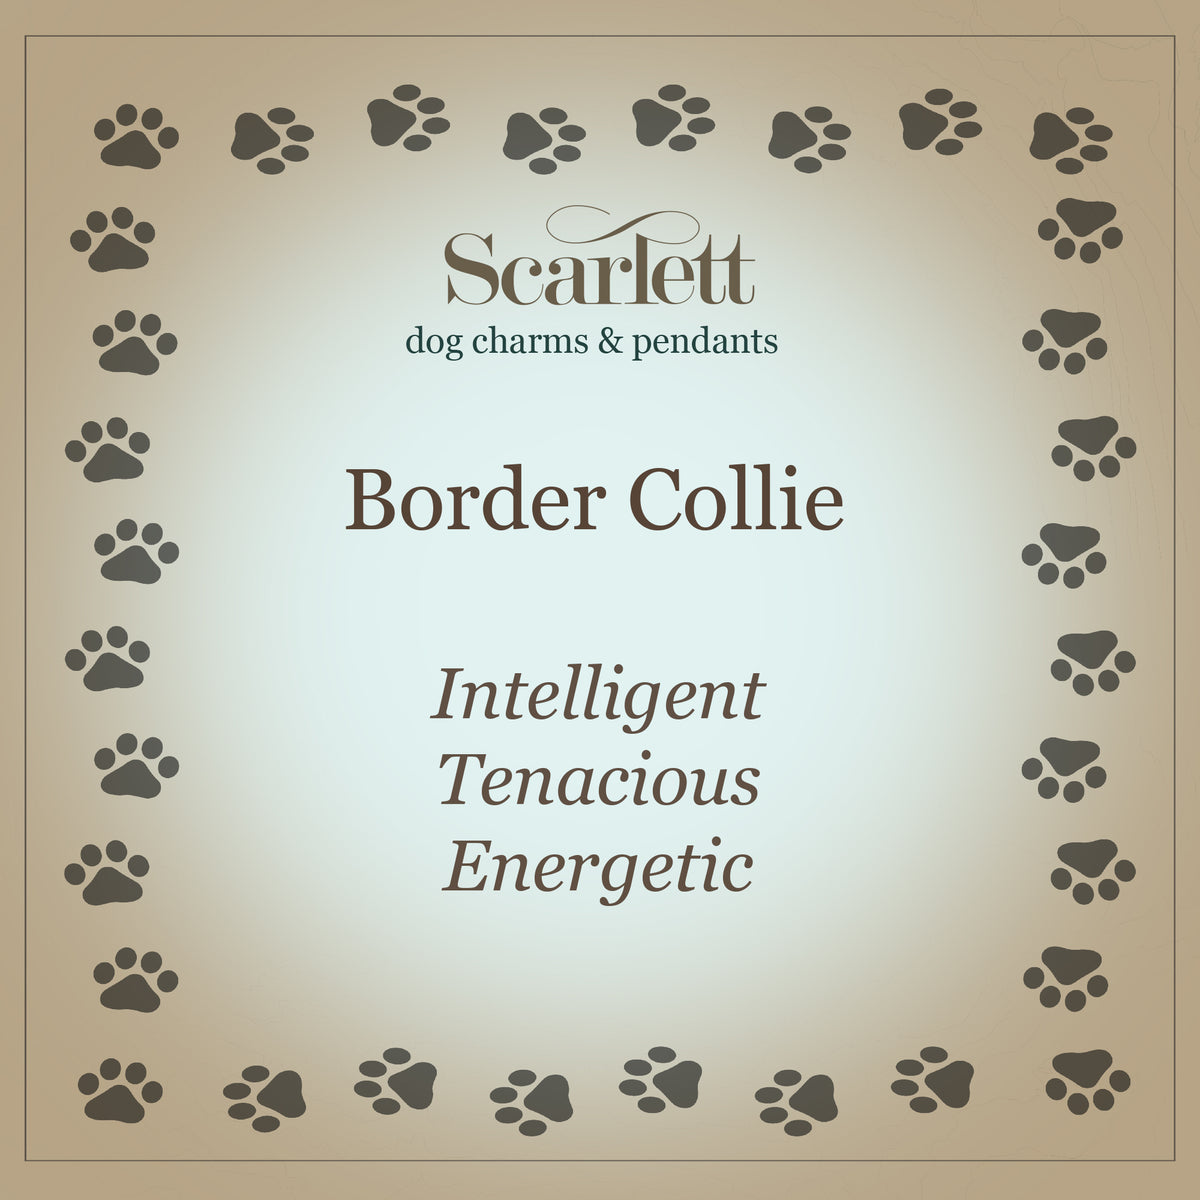 Border Collie Solid Gold Dog Charm